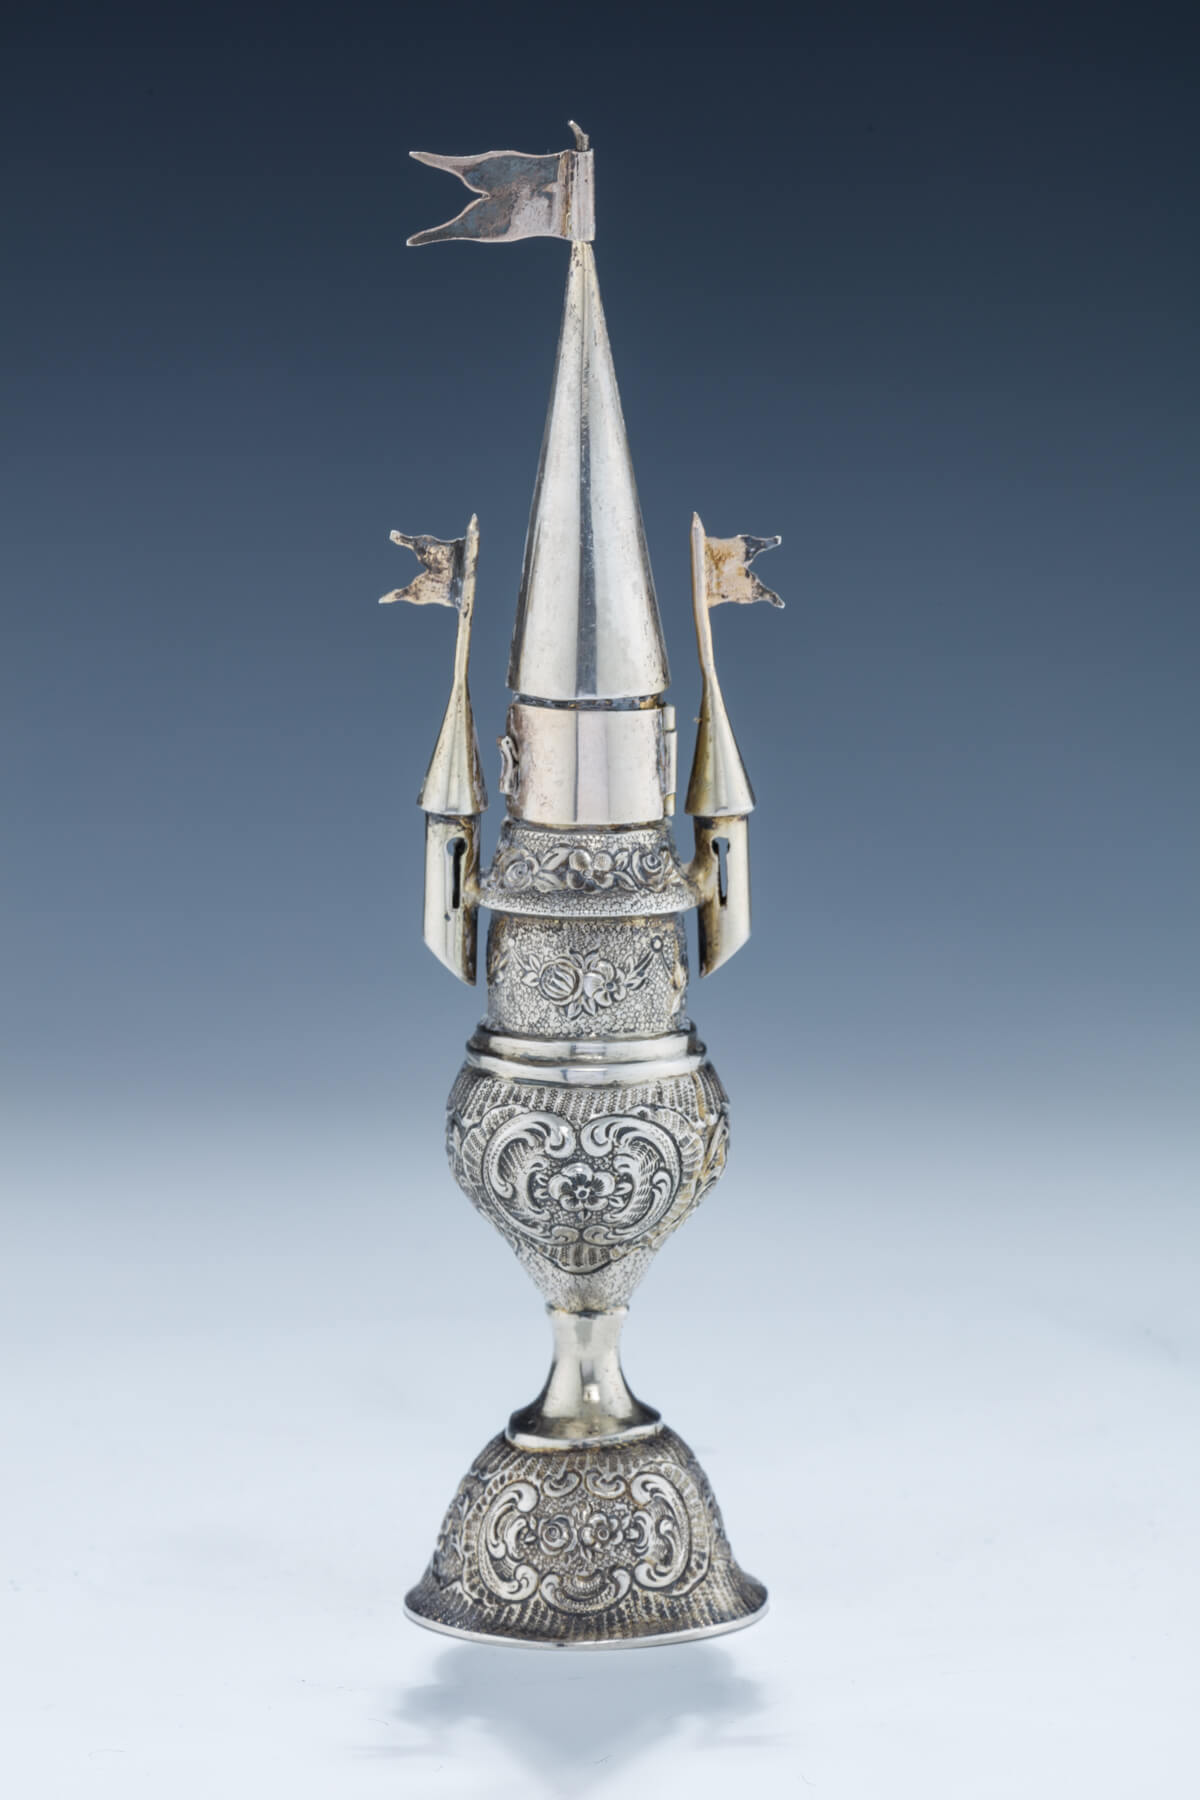 82. A Silver Spice Container And Havdalah Candle Holder